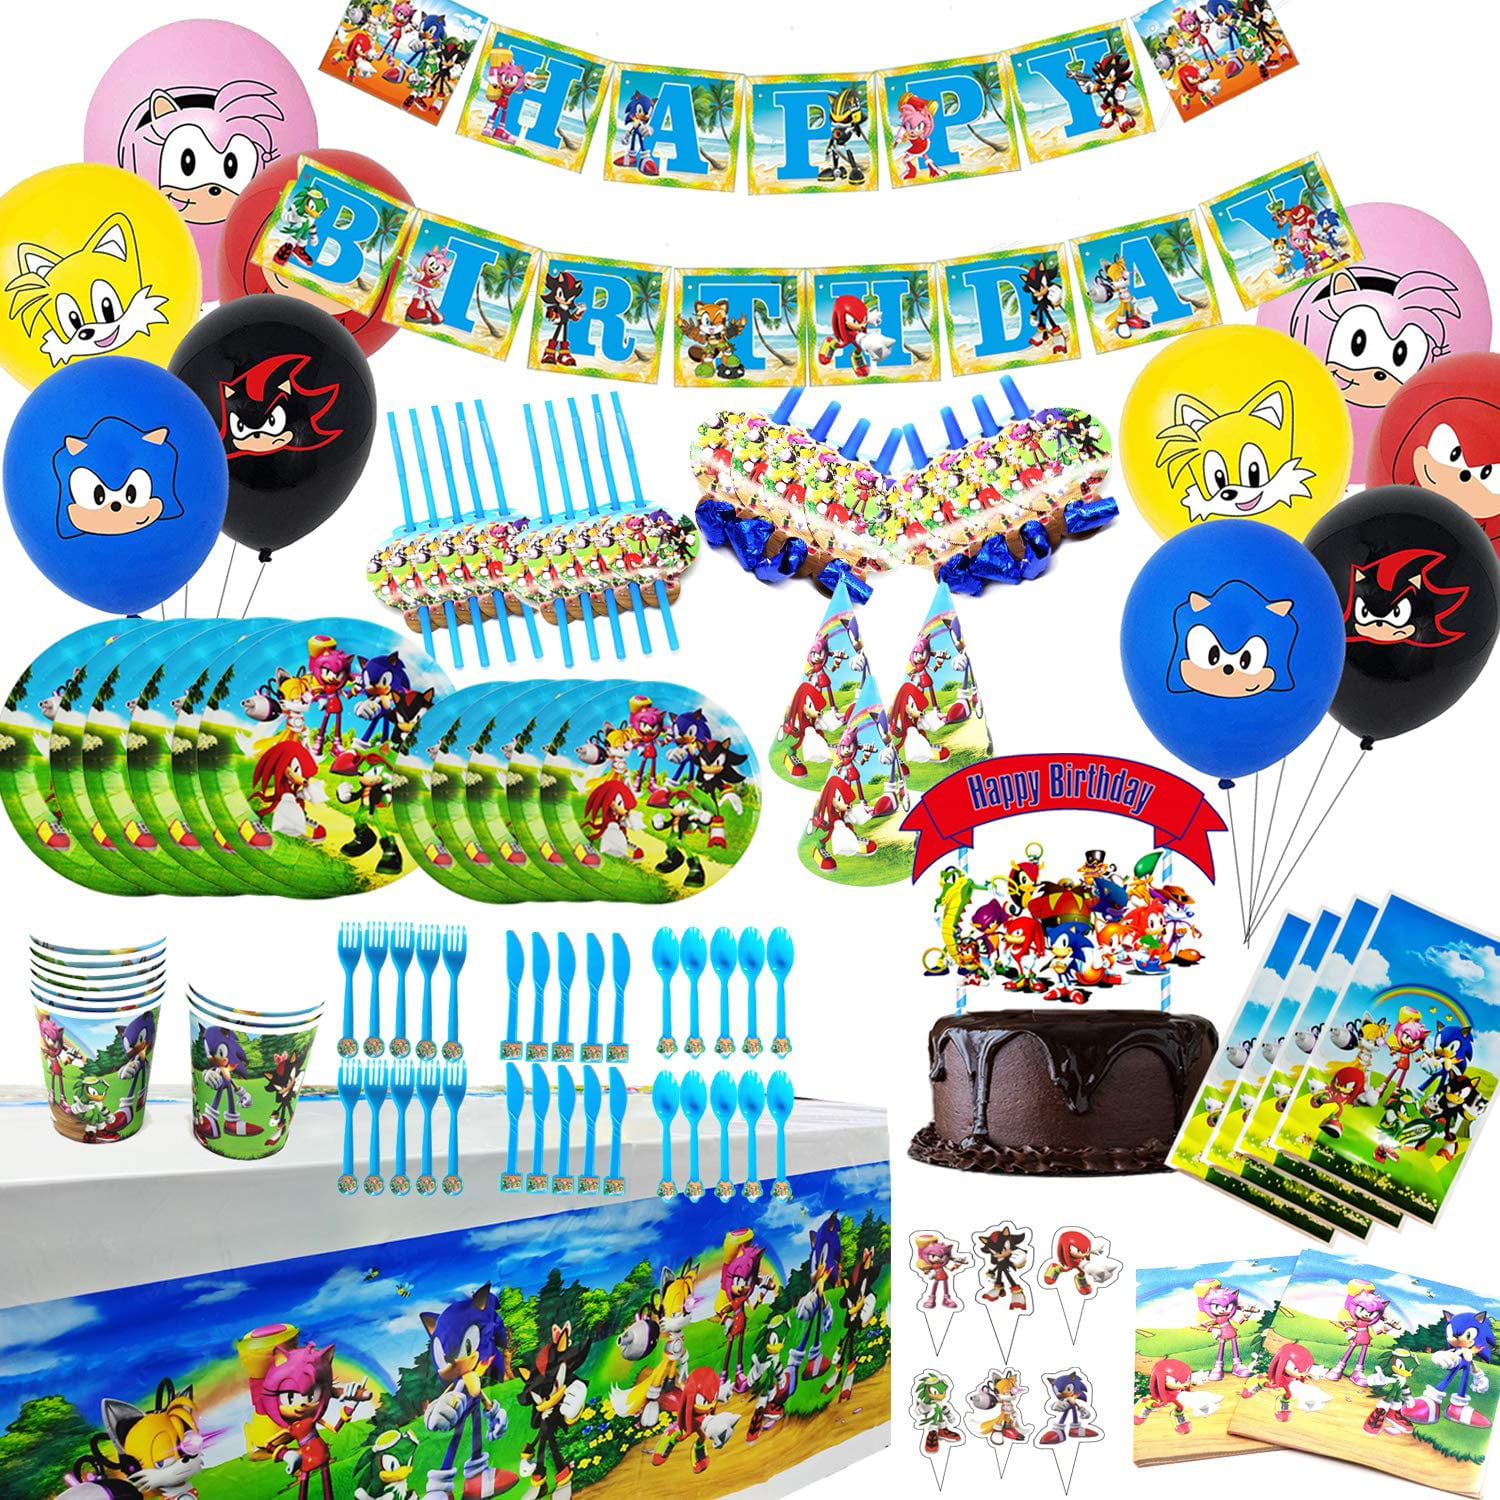 Sonic The Hedgehog Party Supplies,146pcs Birthday Party Decorations Include Happy Birthday Banner,Tablecover,Plates,Knives,Spoons,Forks,Cake Toppers,Cupcake Toppers,Foil Balloons,Latex Balloons,Bottle Labels,Chocolate Stickers 